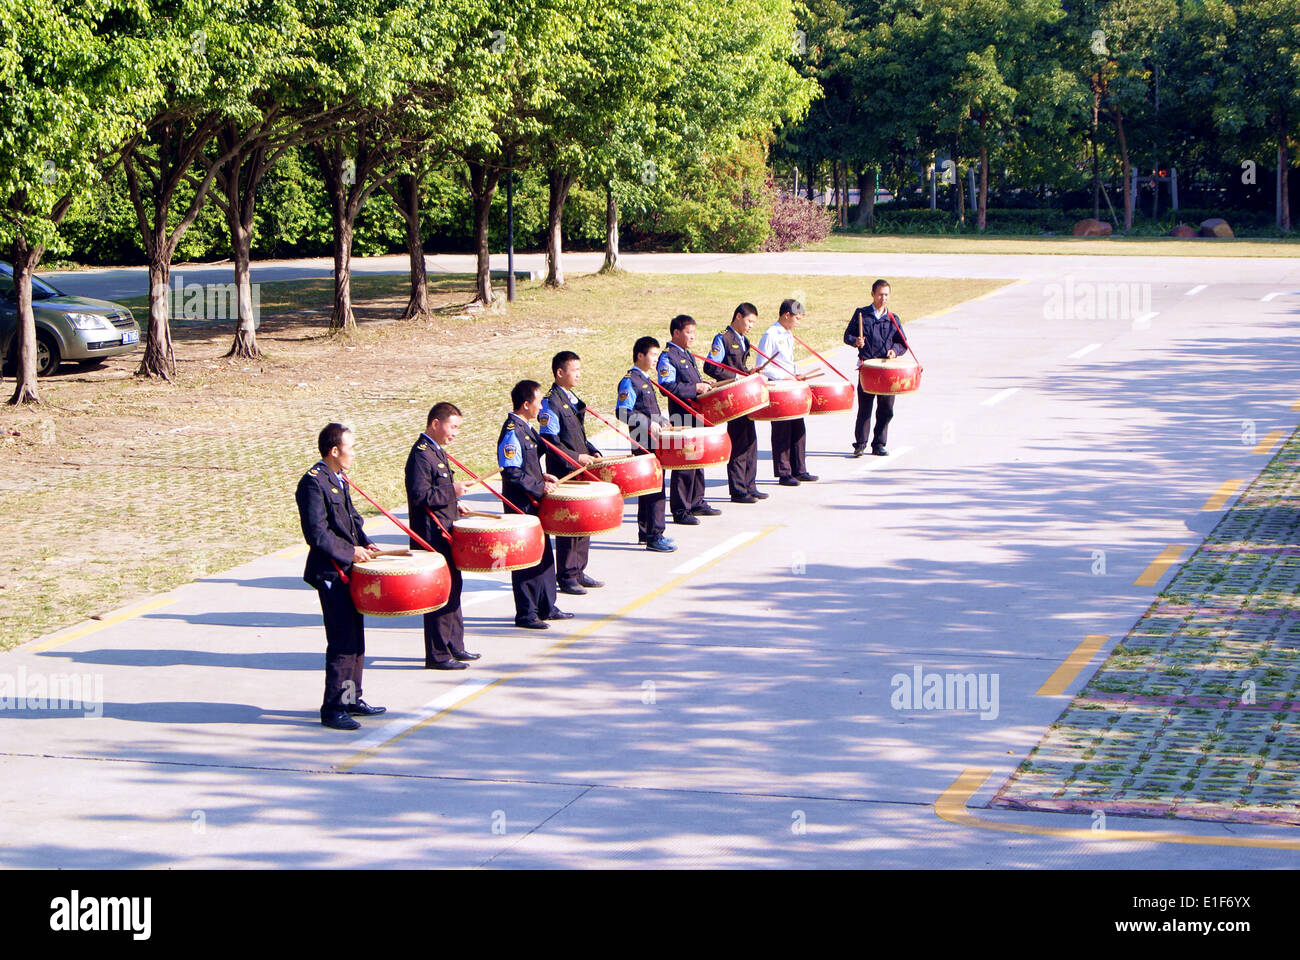 The Chinese community security guard the drums in practice Stock Photo